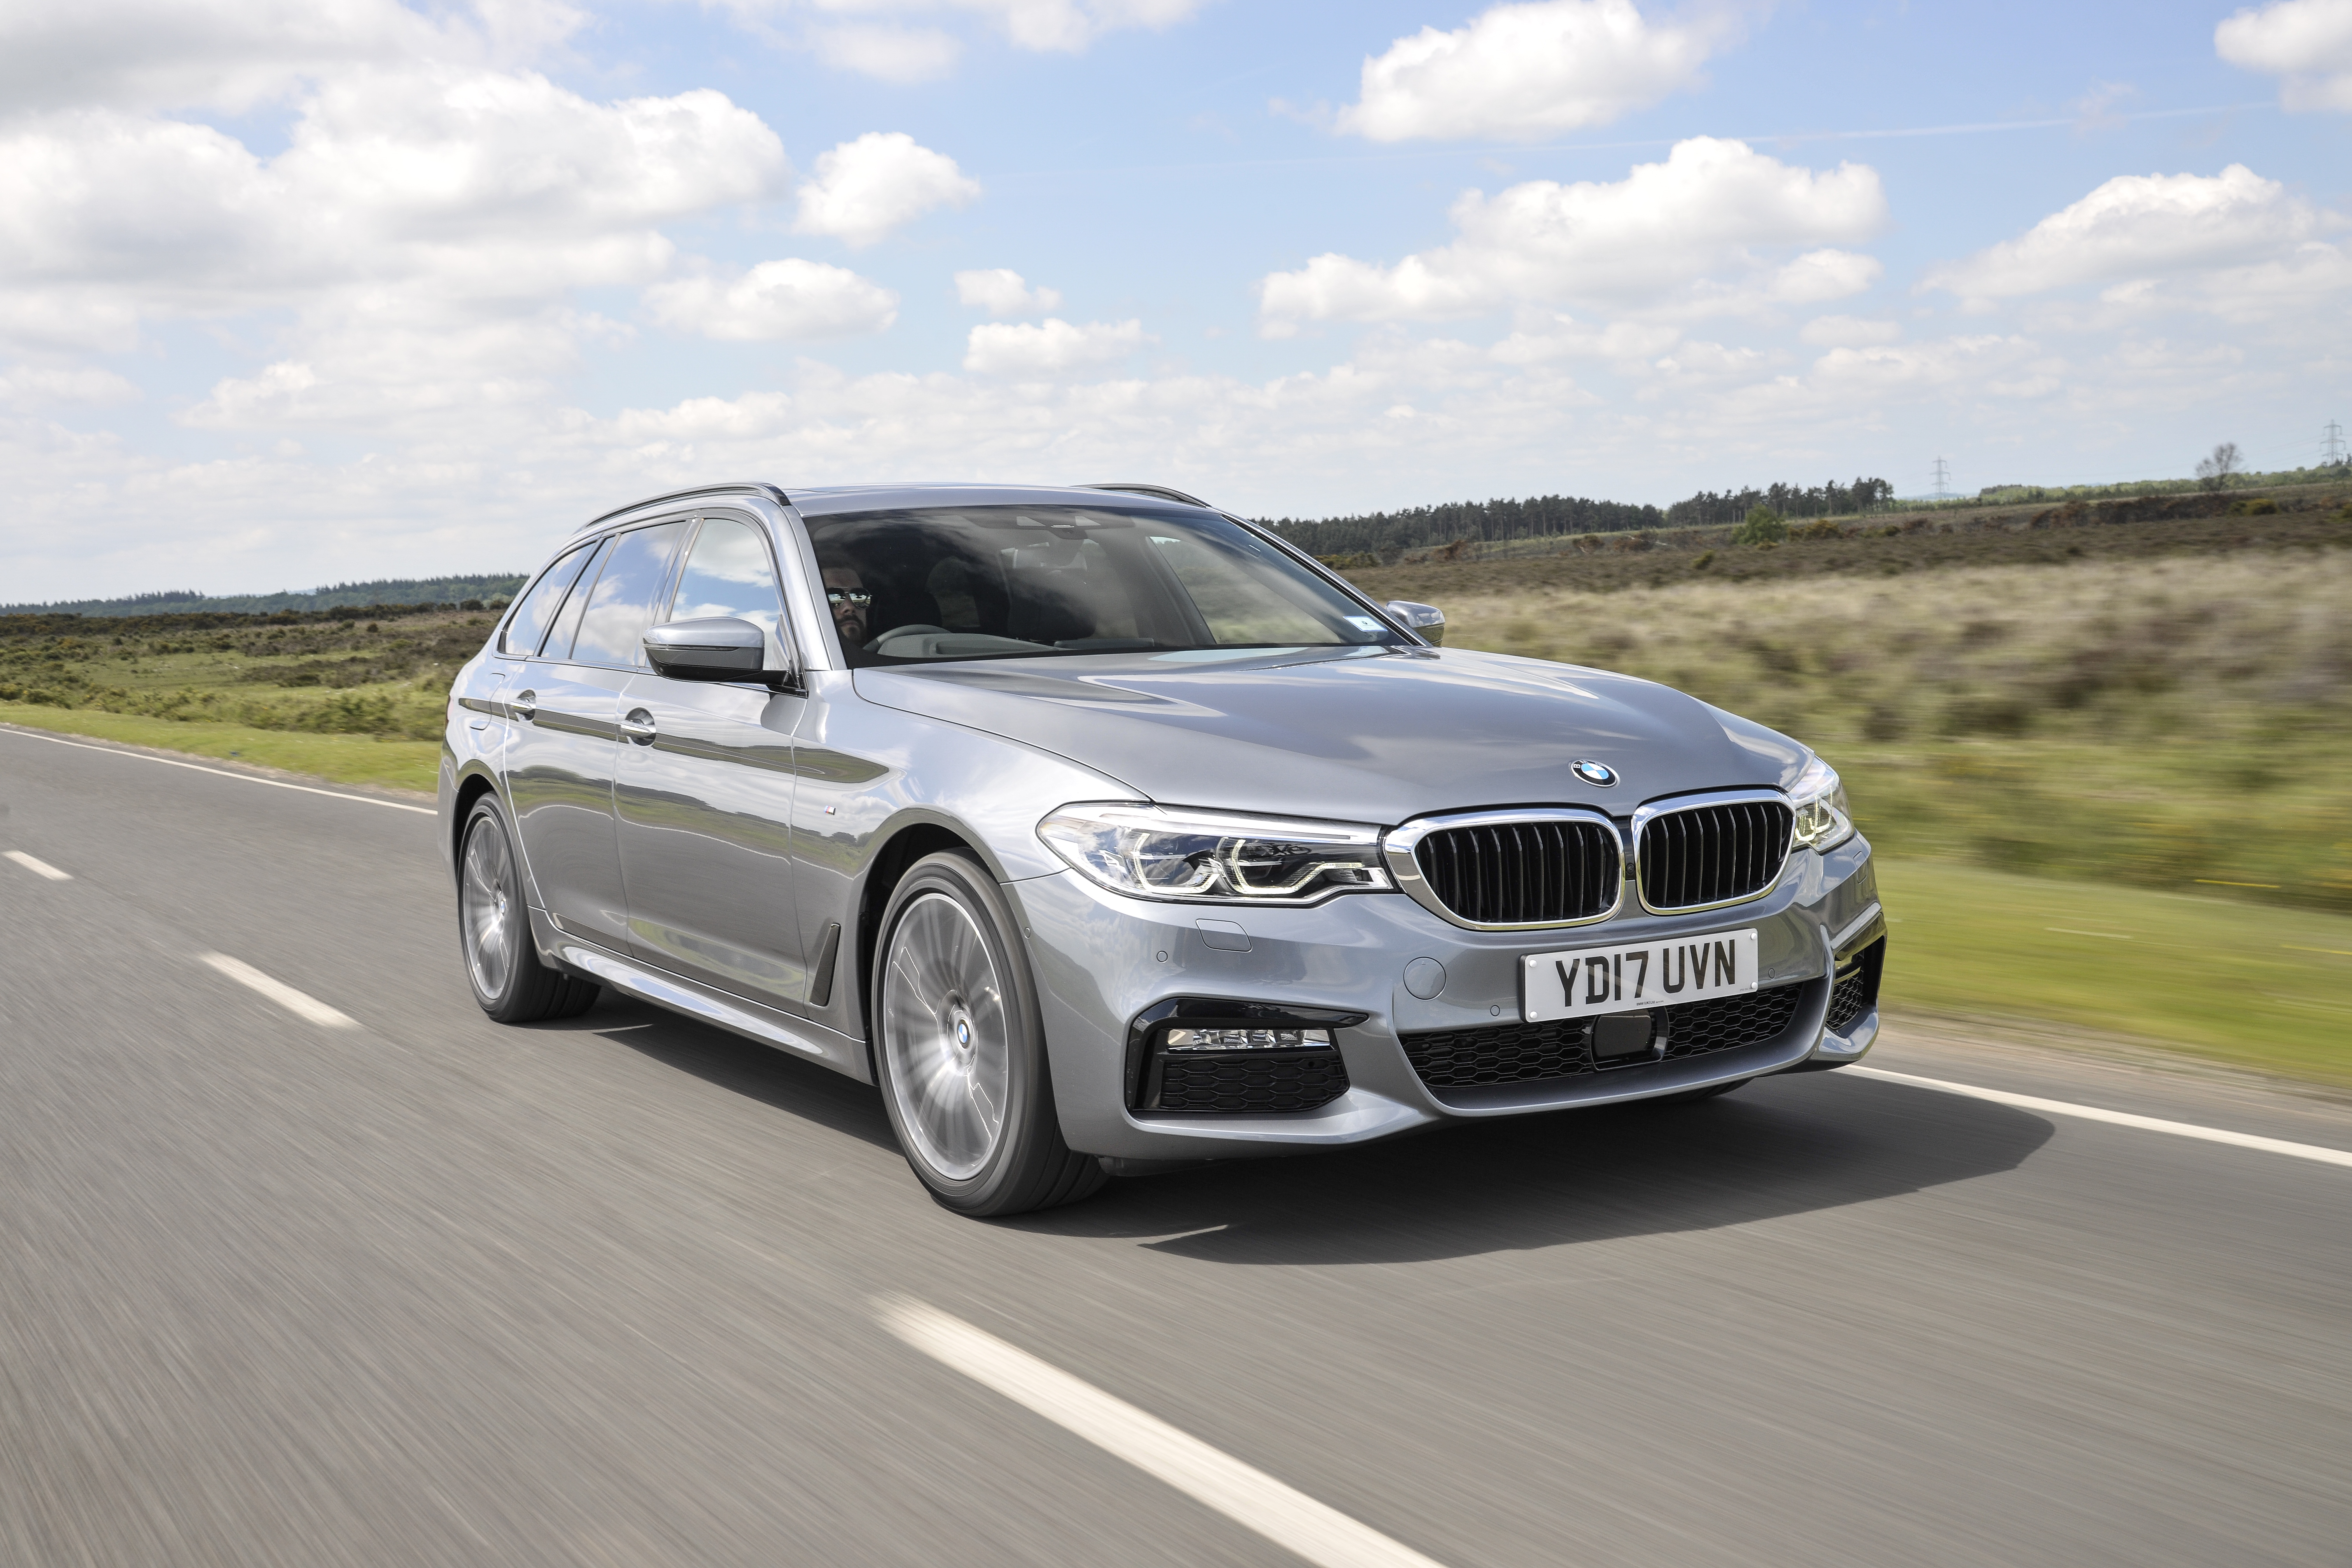 BMW's 5 Series Touring is one of the more dynamic estate cars on the market